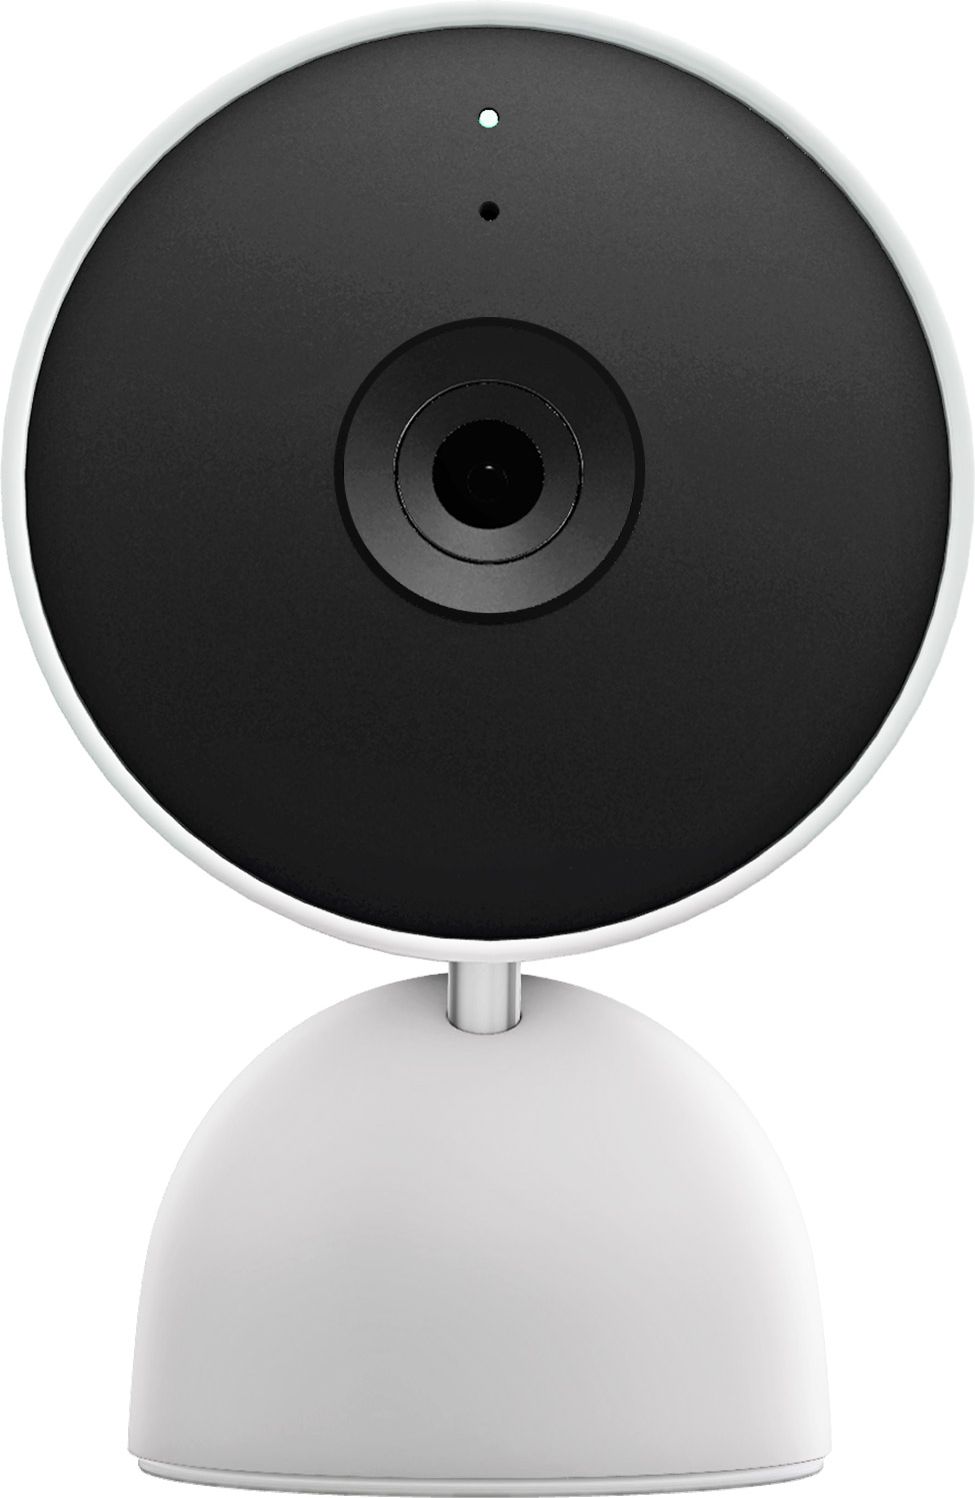 Google Nest Cam Indoor Security Camera Full HD 1080p Smart Home Security Camera - White, White